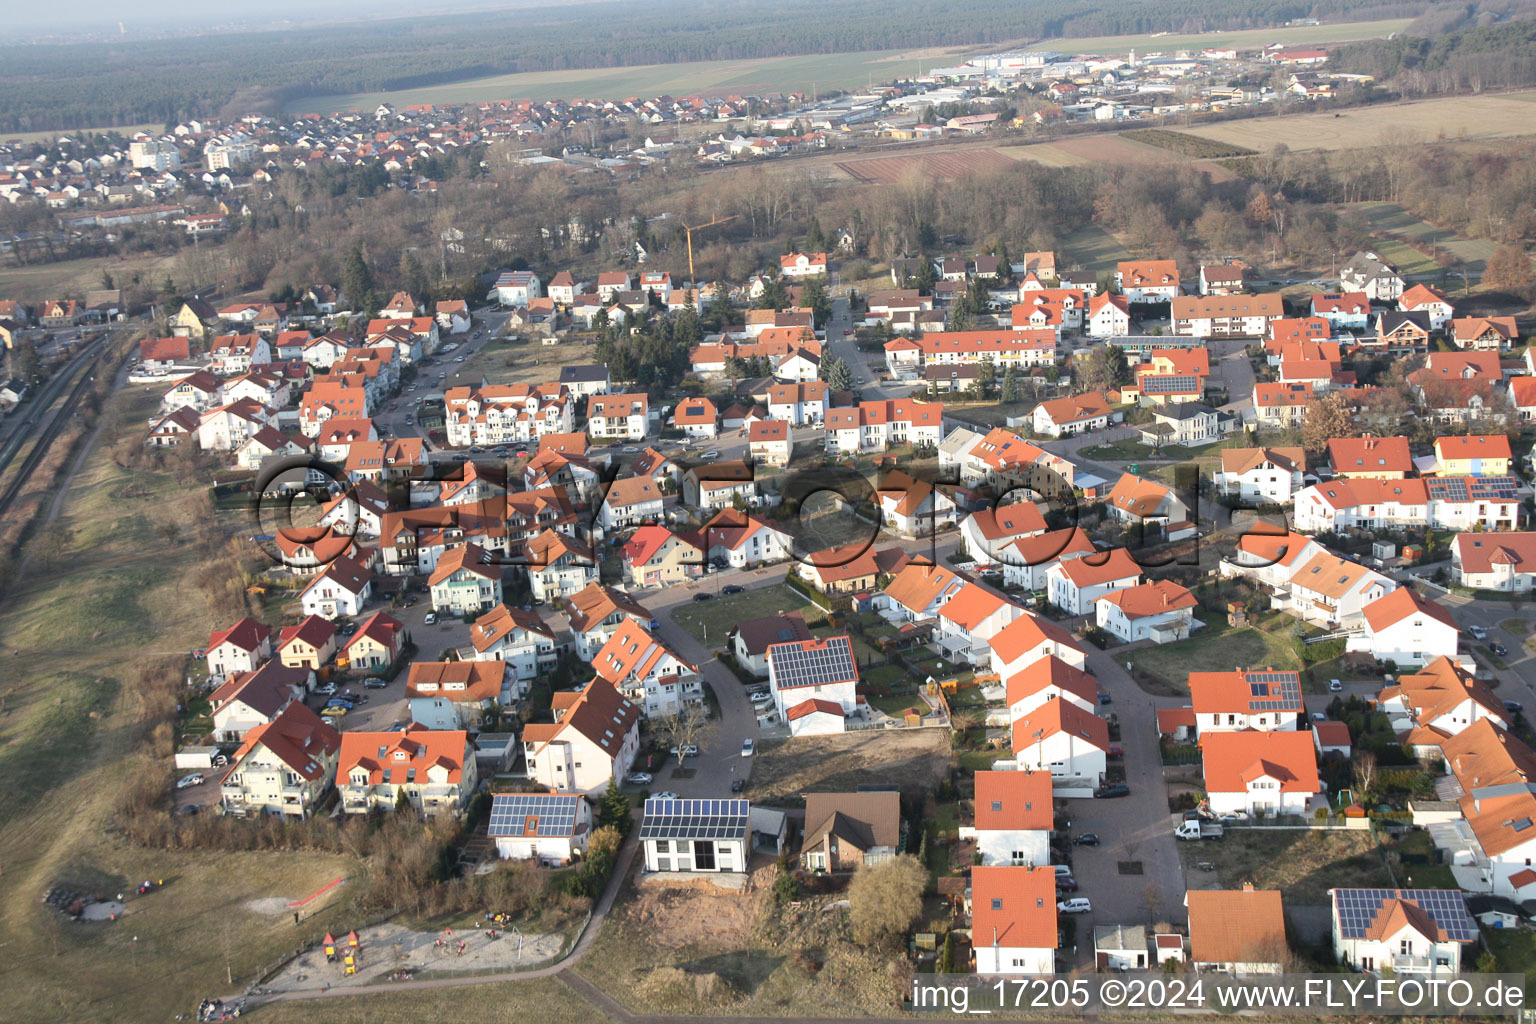 Residential area of the multi-family house settlement East in Bellheim in the state Rhineland-Palatinate